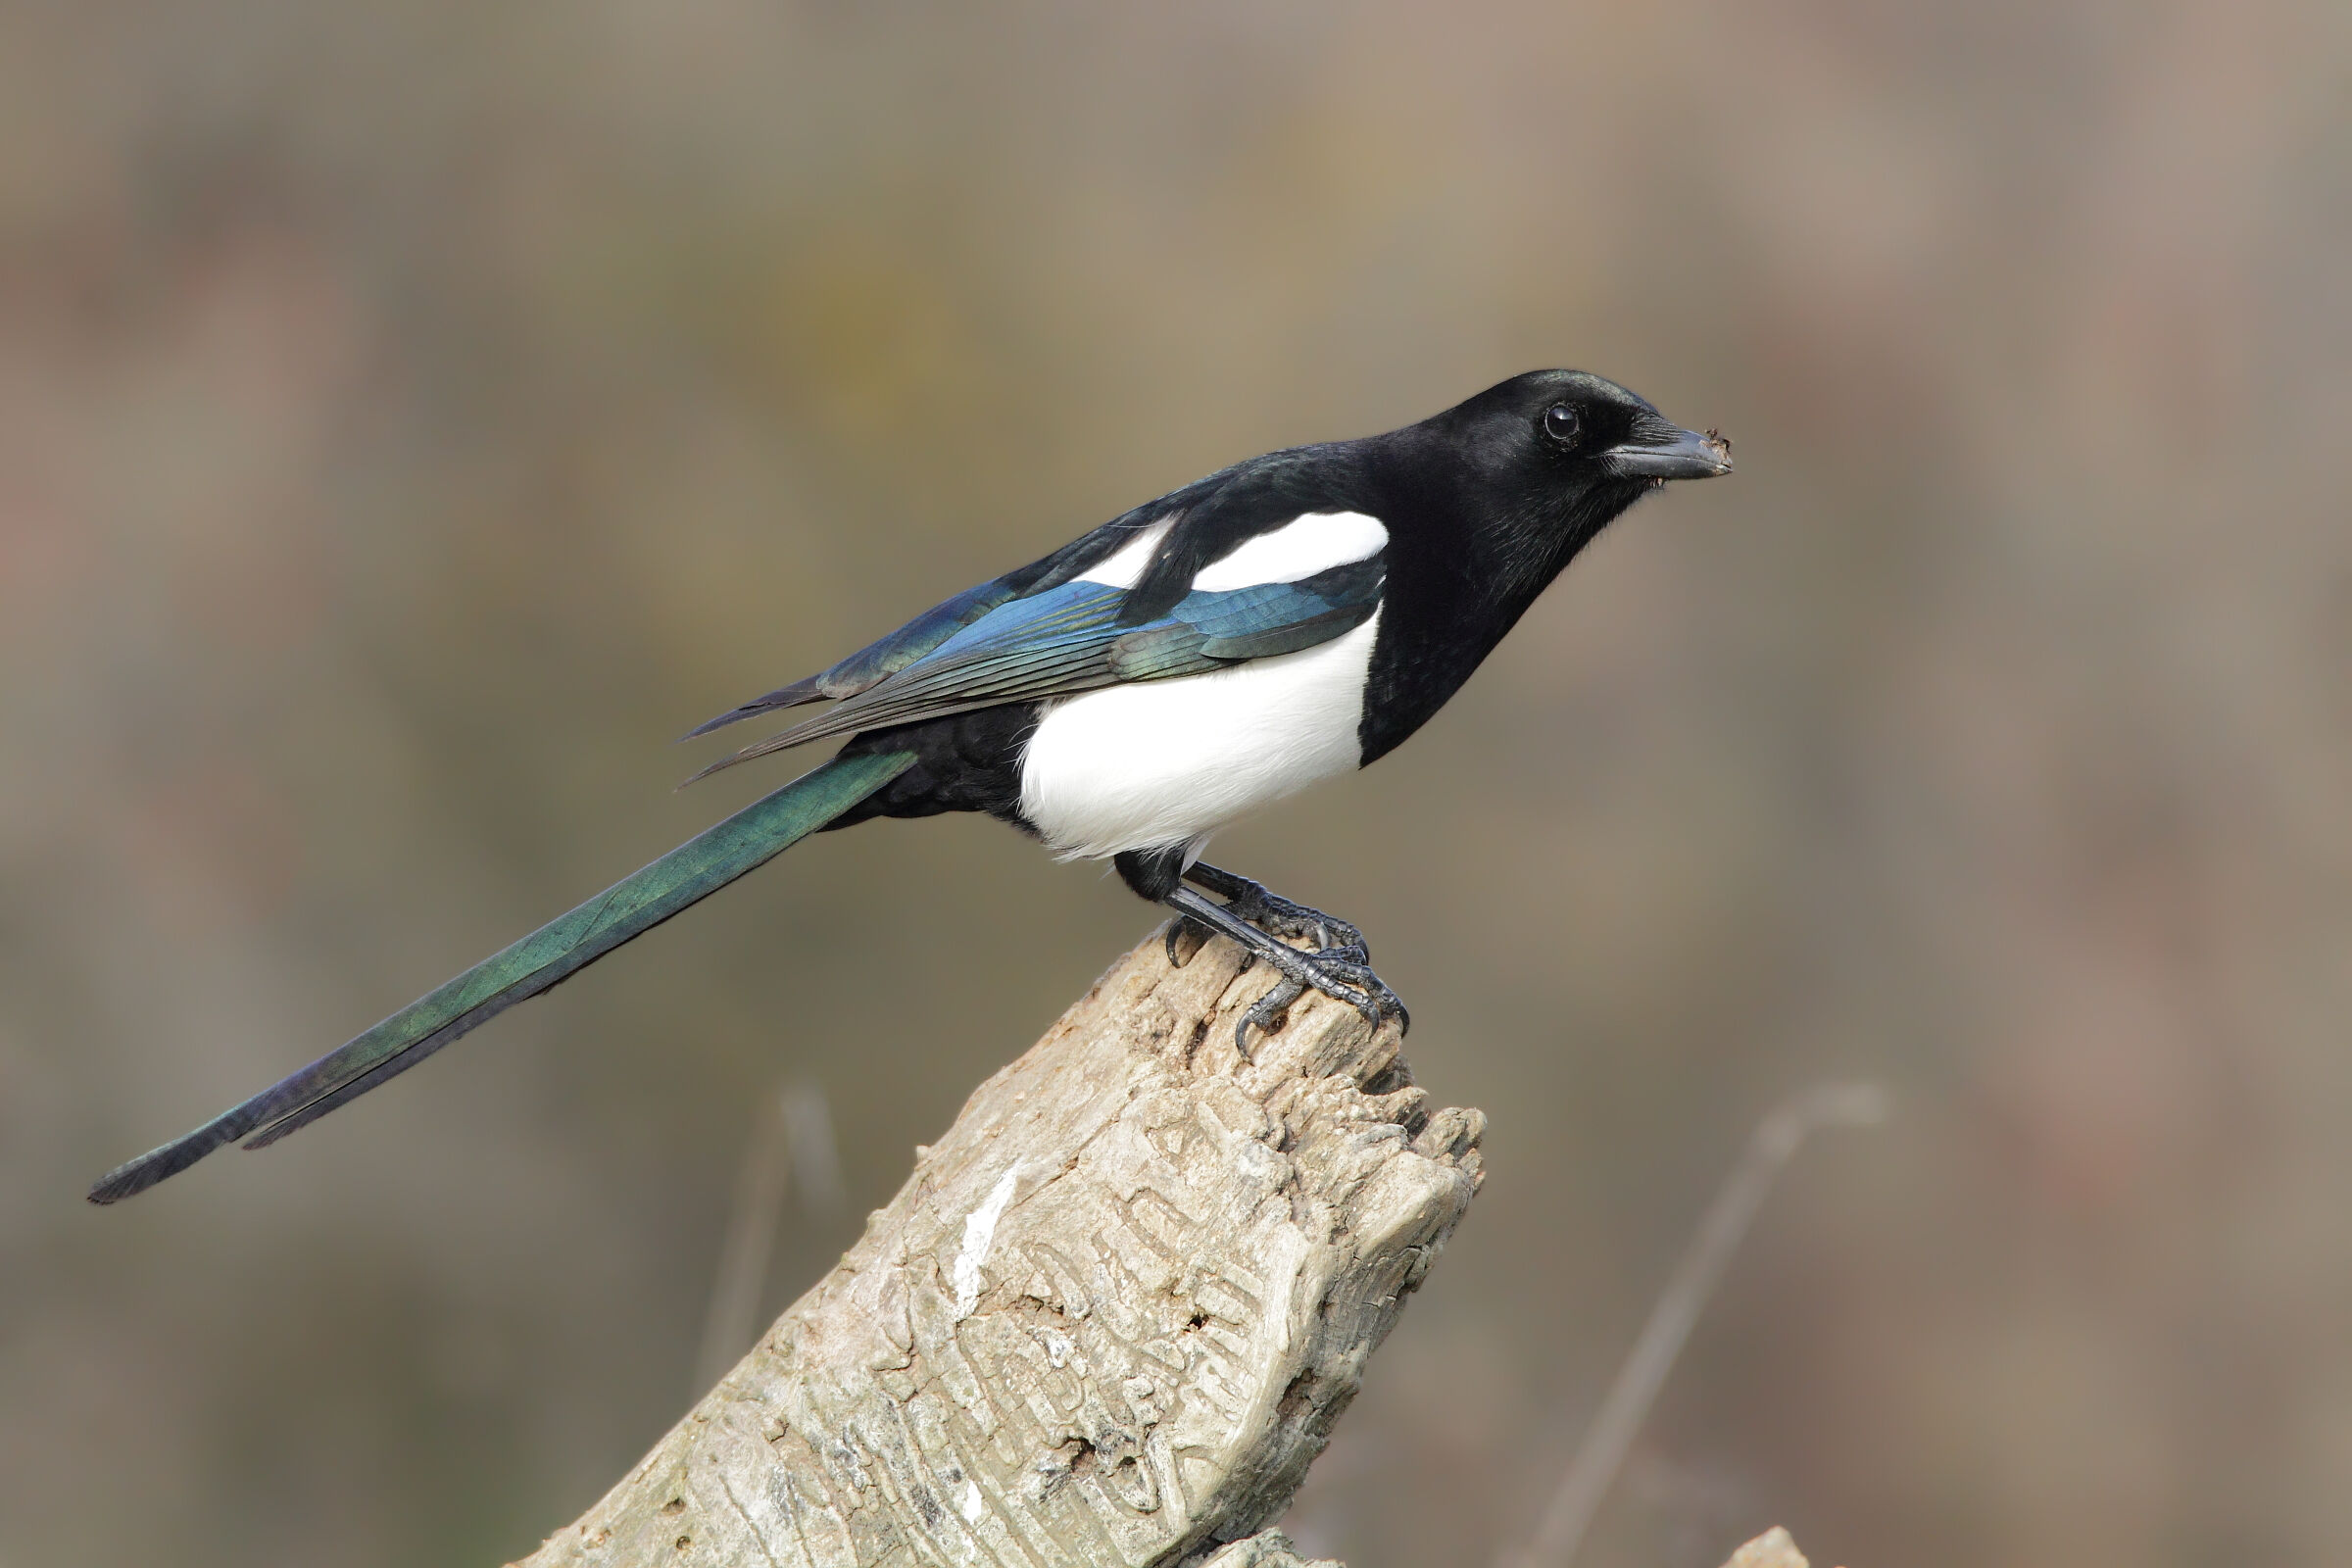 Finally the magpie in beautiful pose...